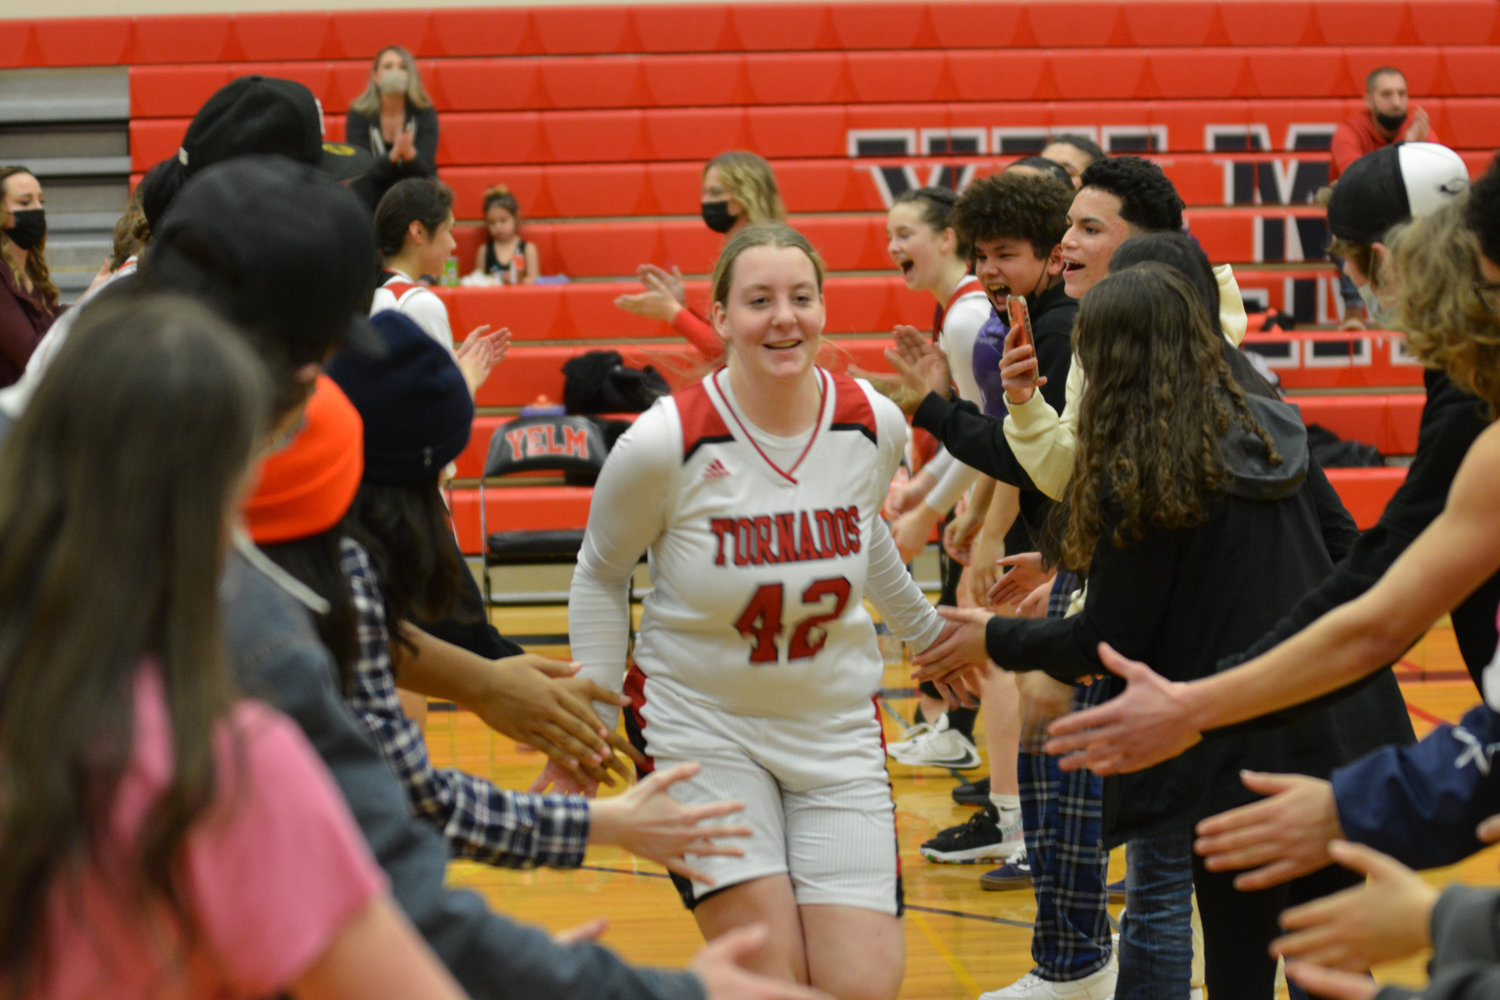 Morgan Whited makes her entrance after being introduced at the game against Mount Tahoma on Feb. 11.